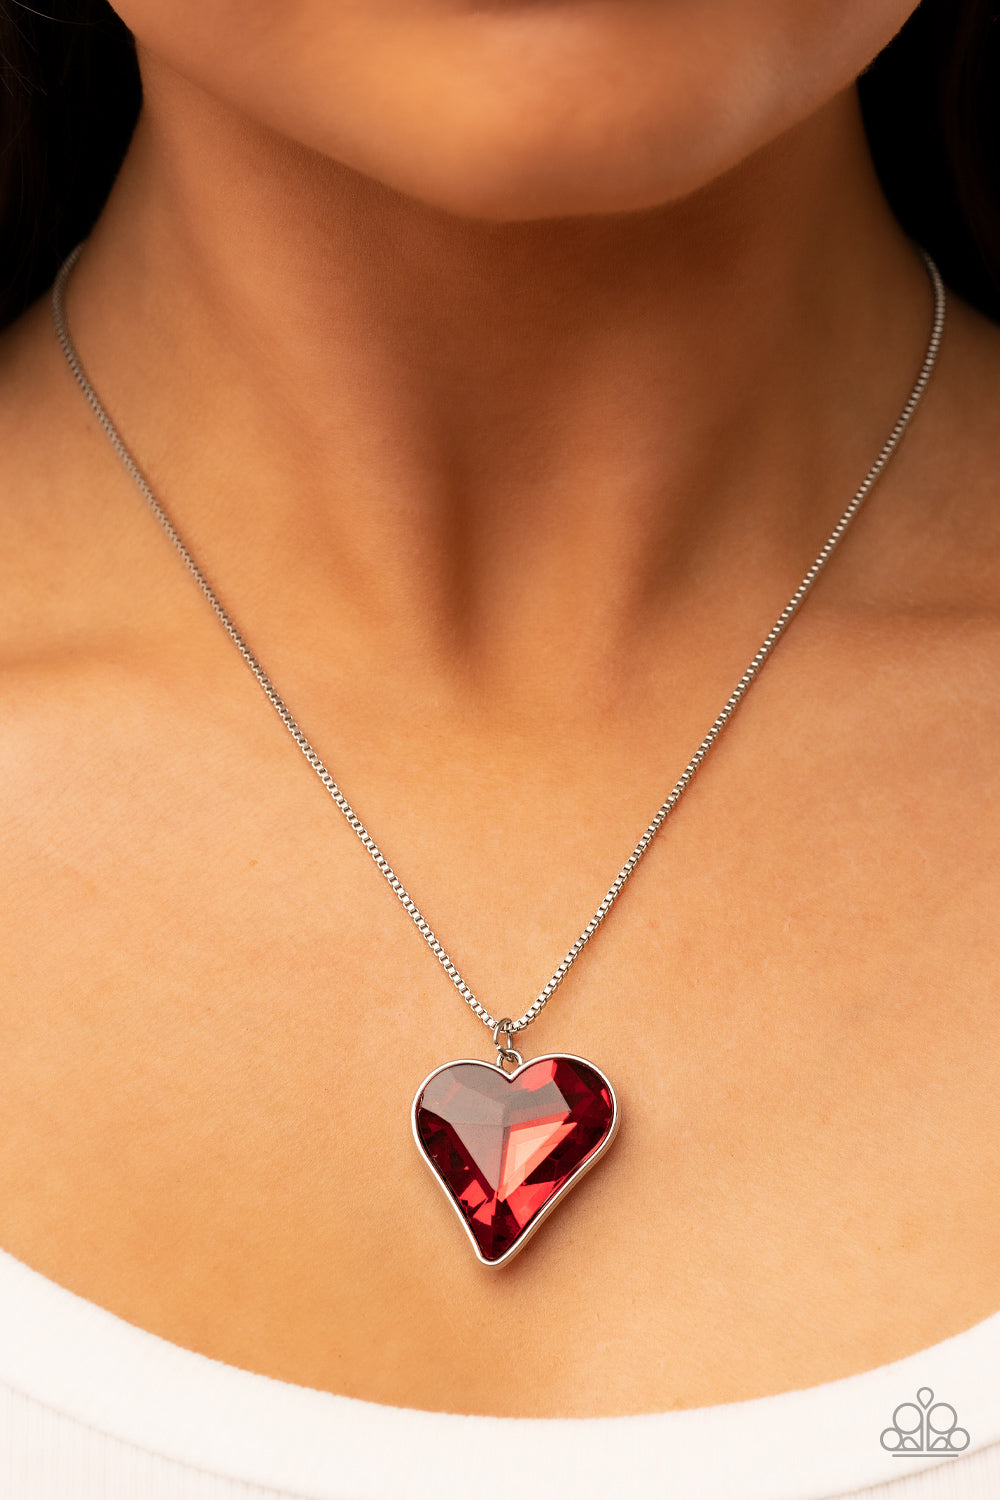 Lockdown My Heart Necklace - Red